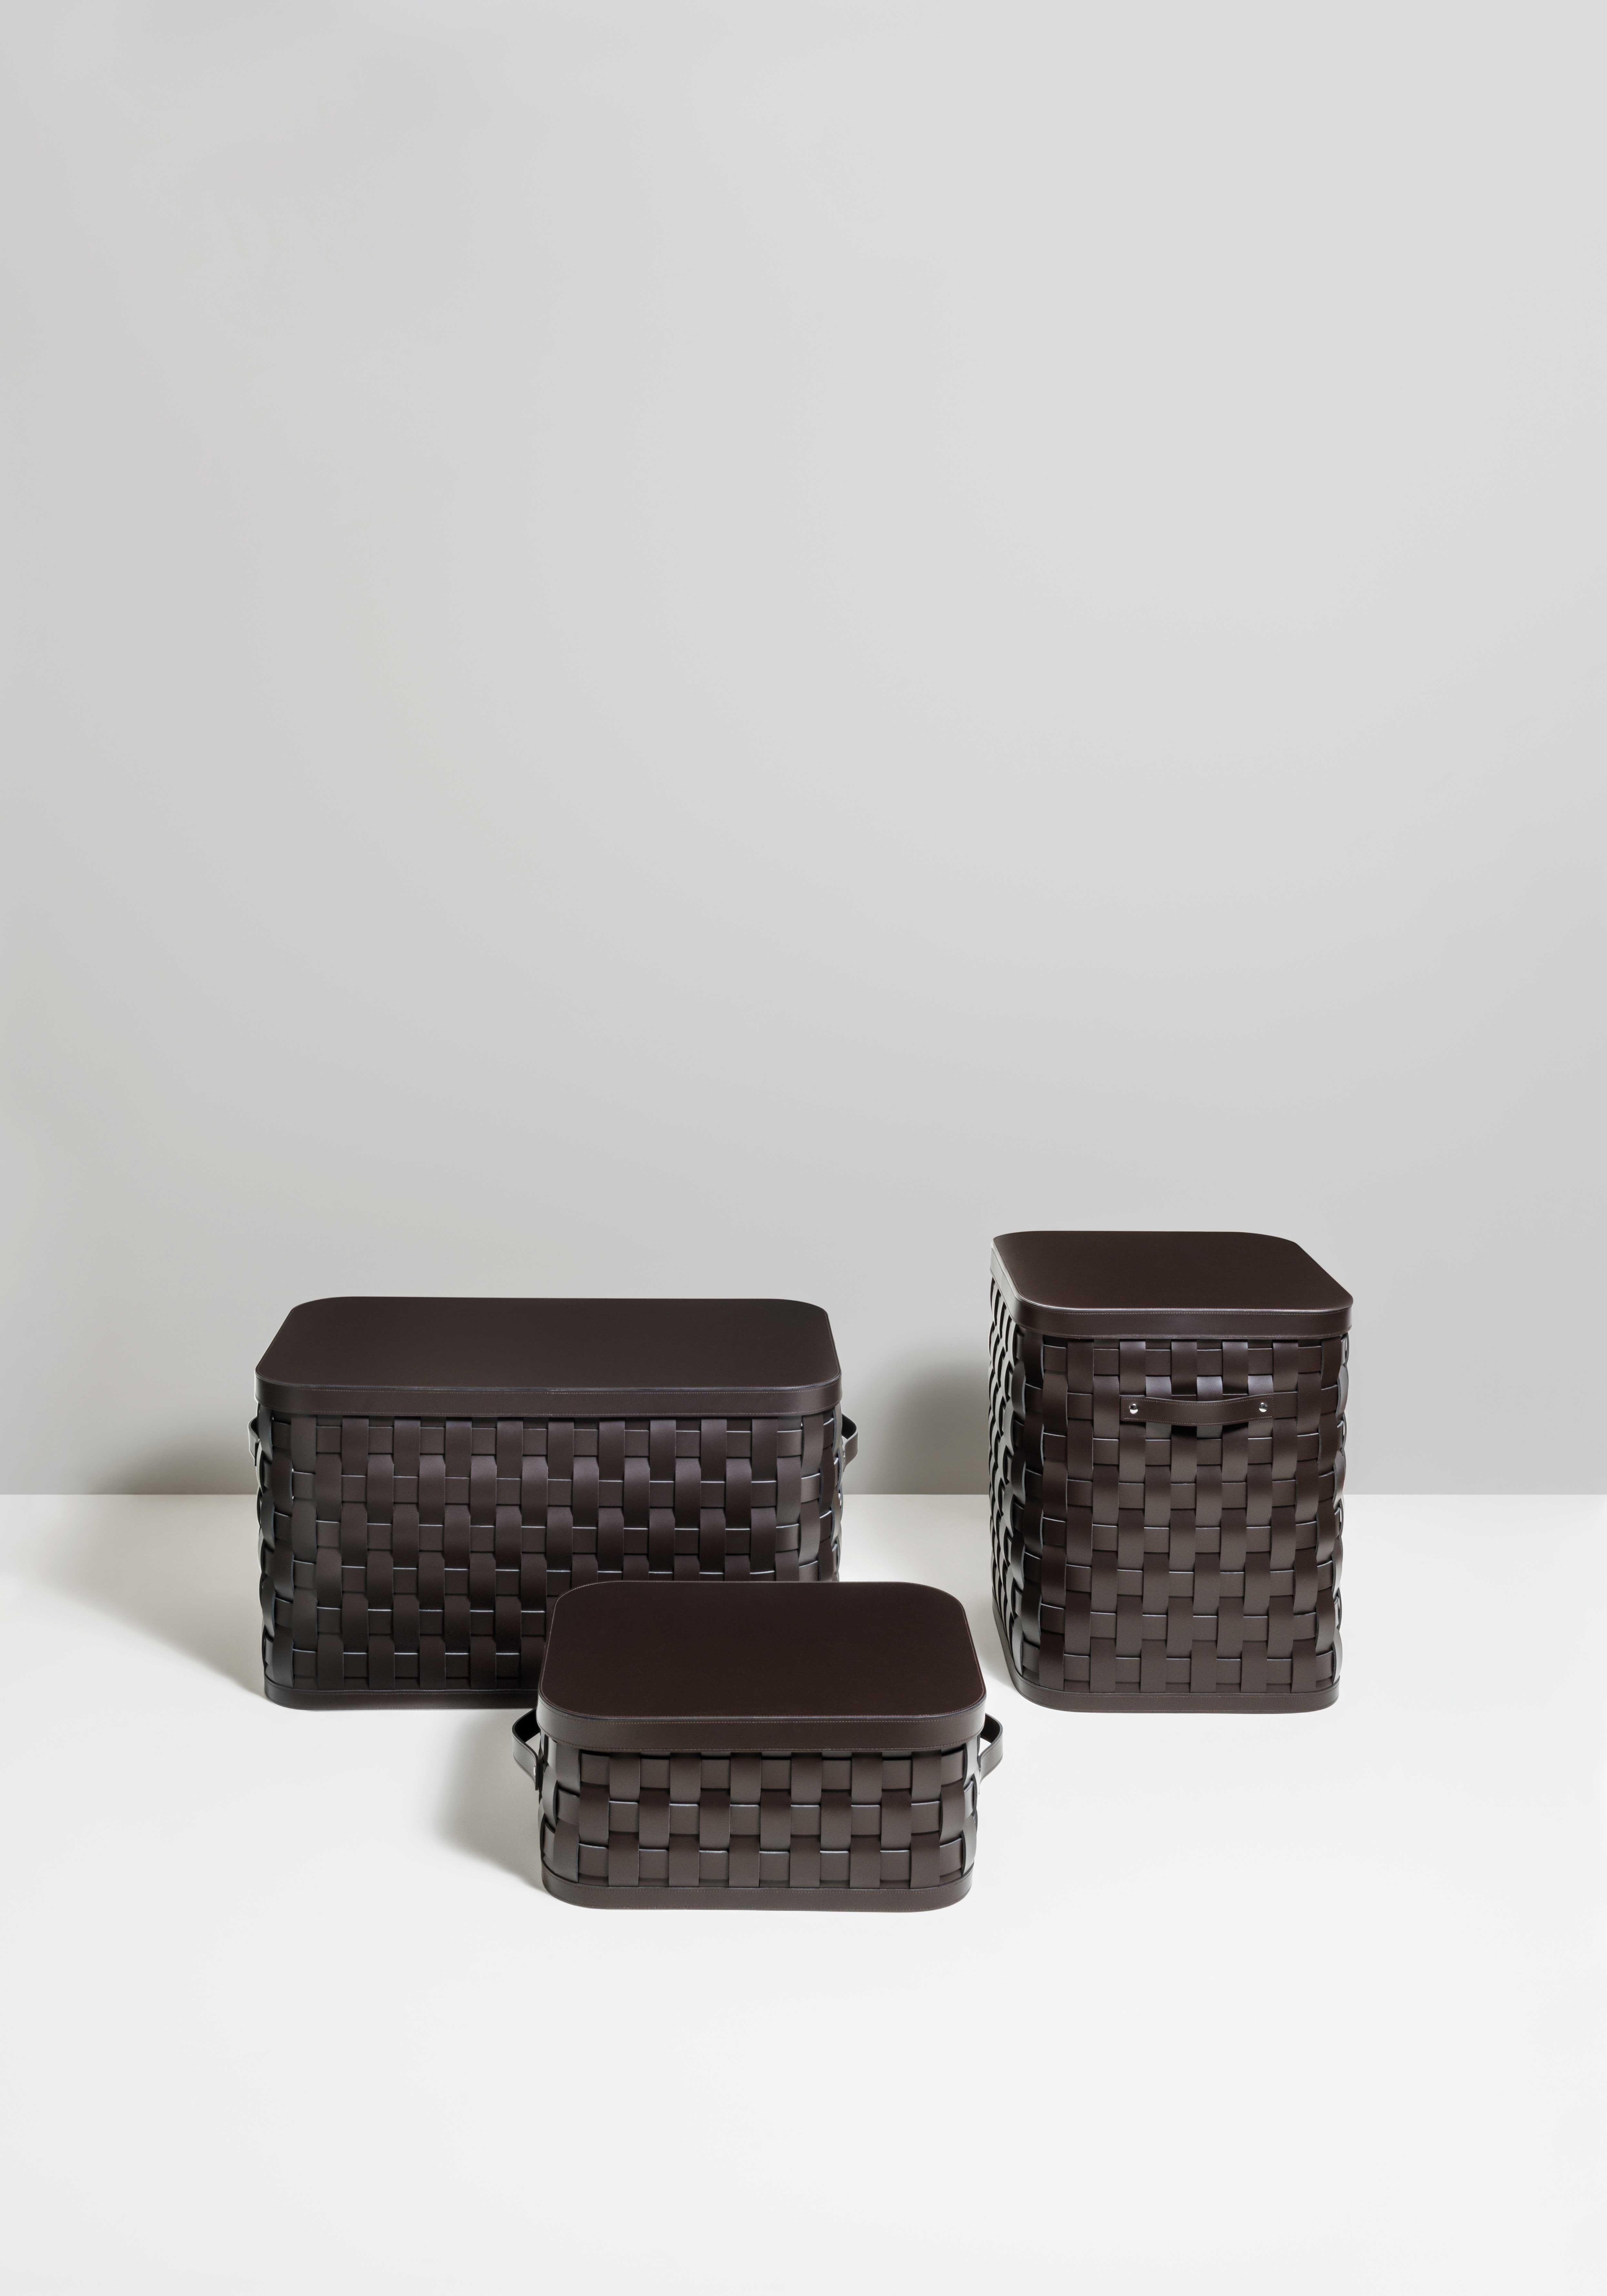 A real eye-catcher.

 Part of the Demetra series, Pinetti low rectangular basket is strictly hand woven. Made with water-resistant and washable bonded leather useful also for outdoor use this basket is completed with a smooth brown leather